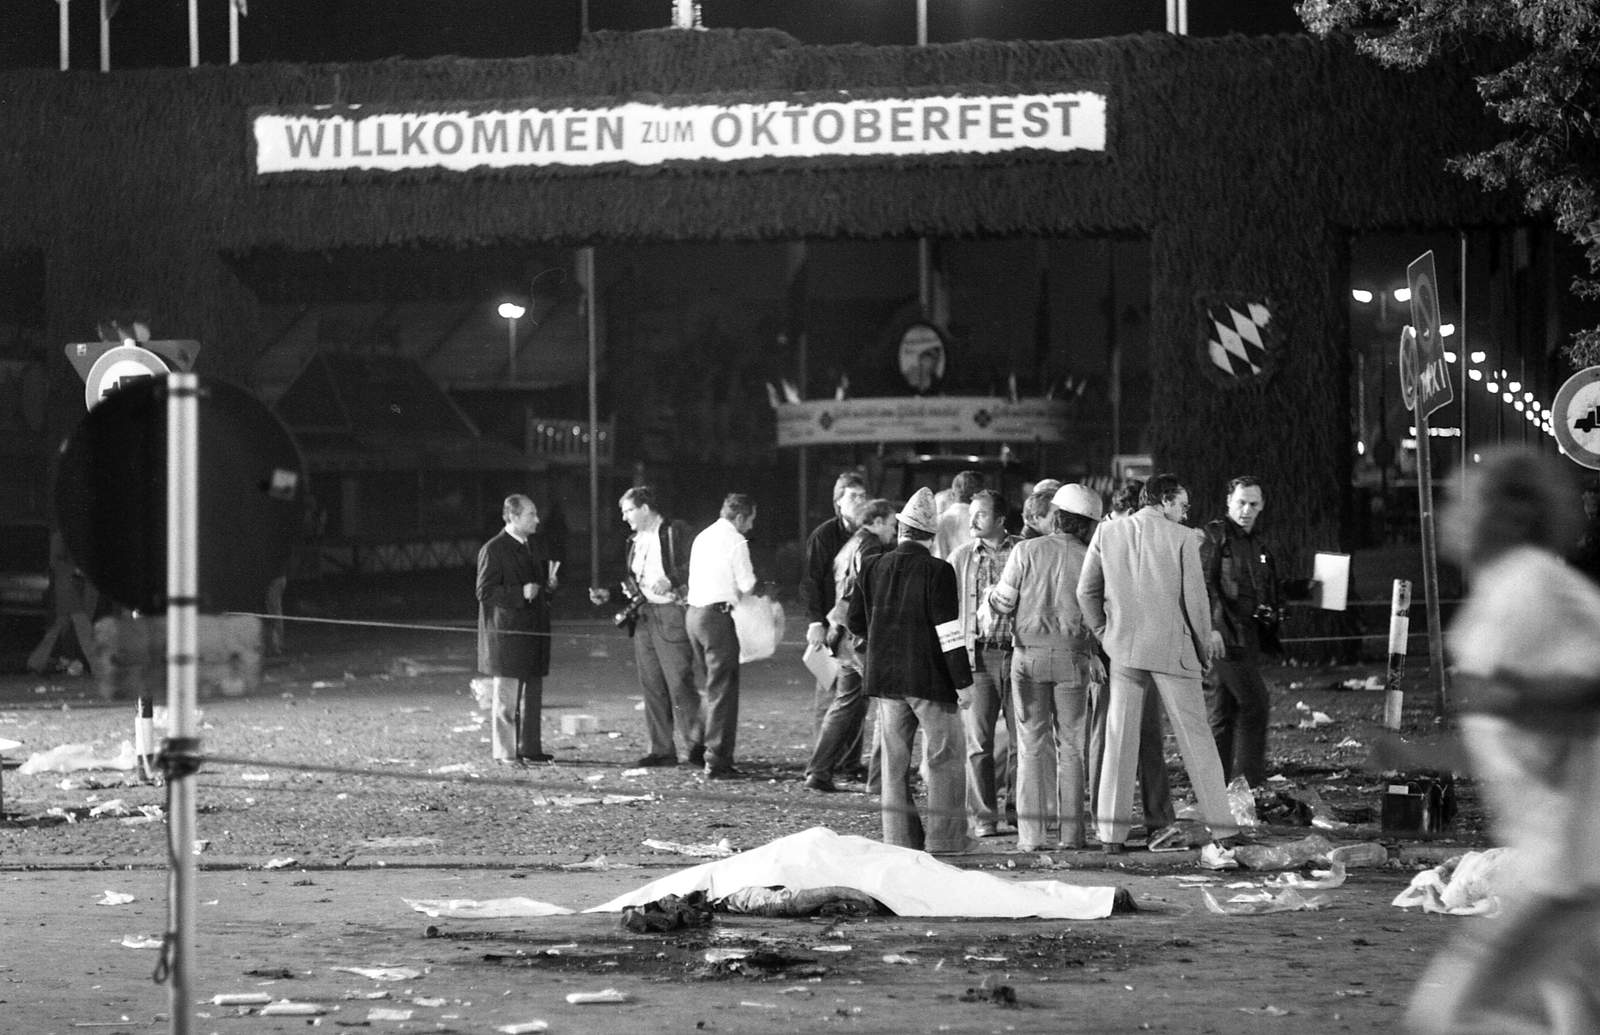 Germany pays tribute to victims of 1980 Oktoberfest bombing